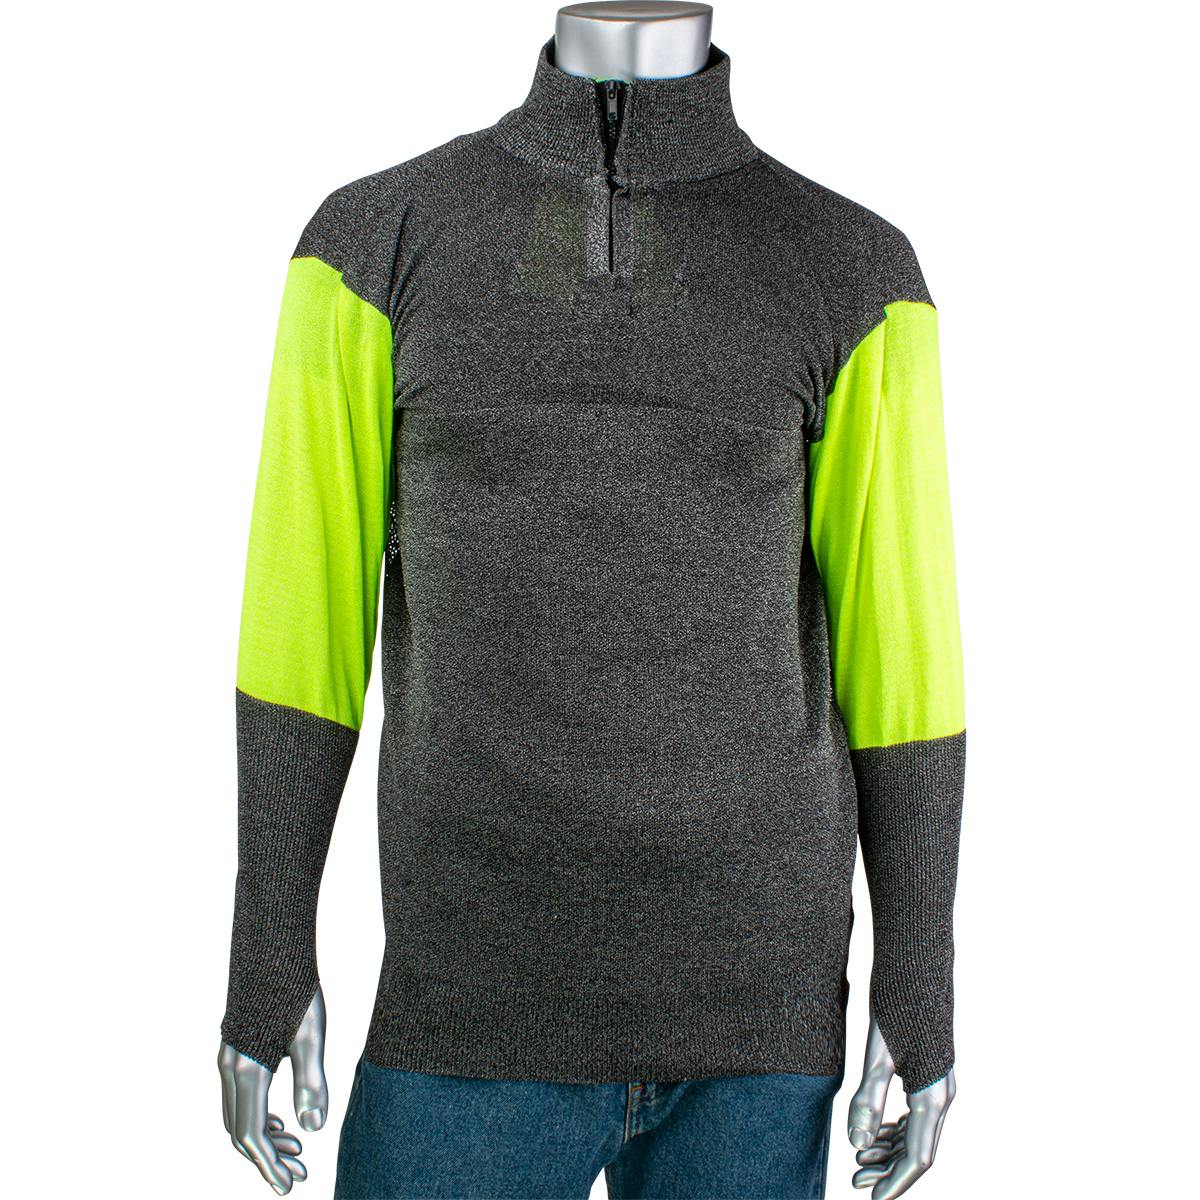 ATA® Blended Cut Resistant 1/4 Zip Pullover with Hi-Vis Sleeves and Thumb Holes, Dark Gray (PJG145-3CM-HVB-TH)